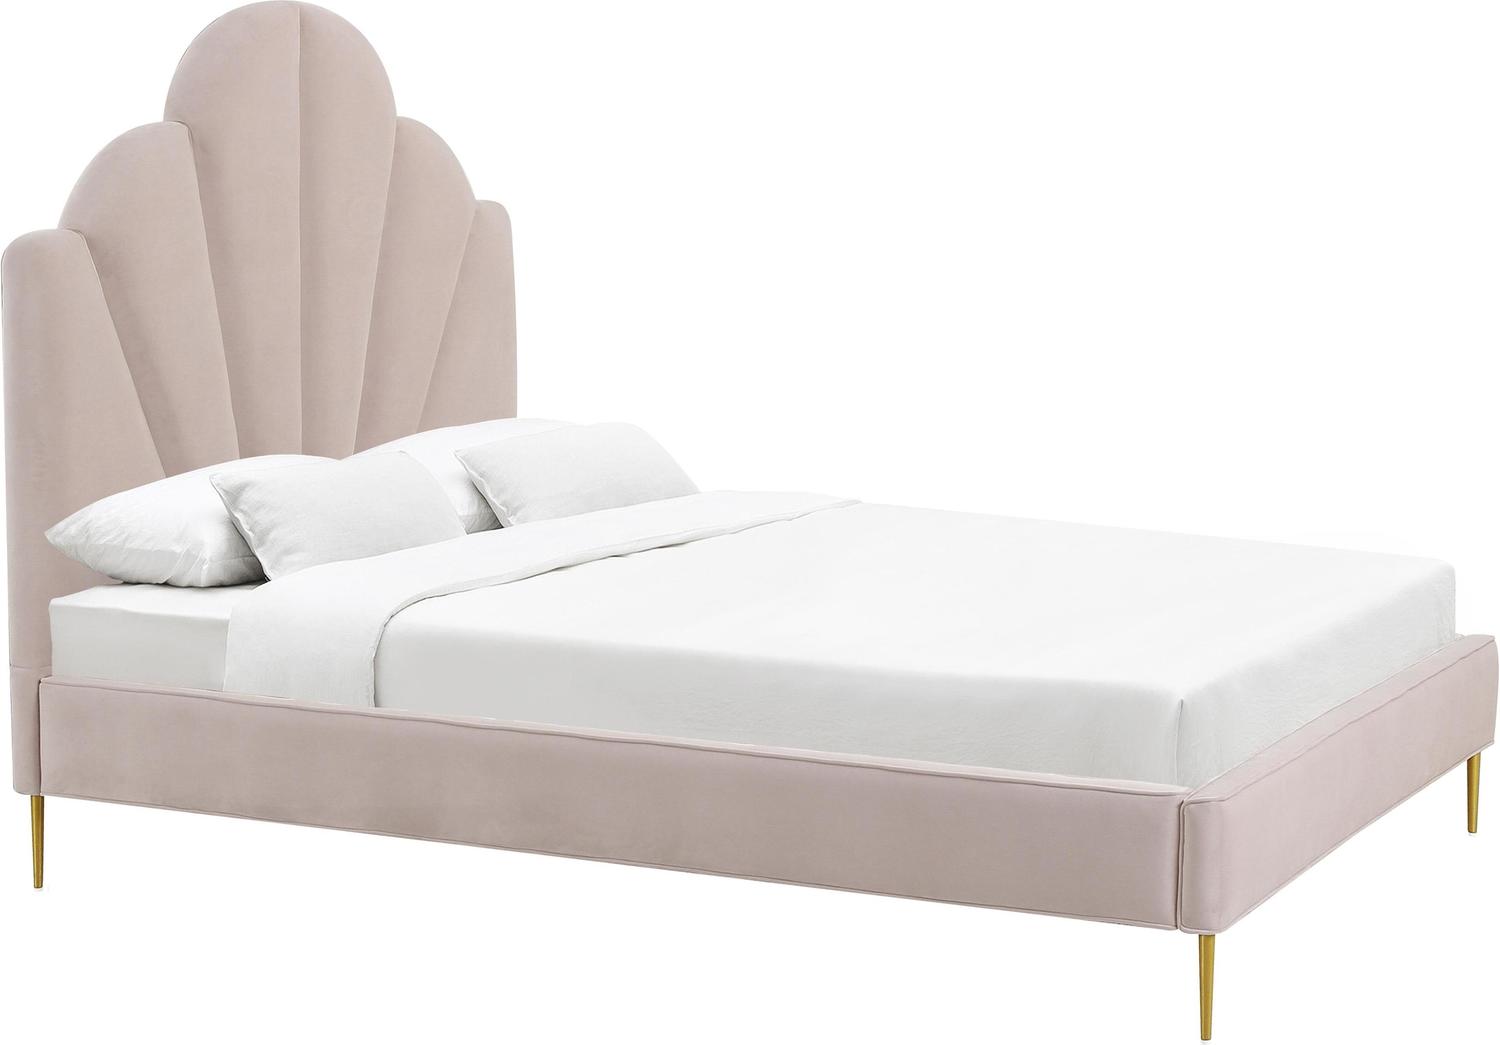 queen fabric headboard and frame Tov Furniture Beds Blush